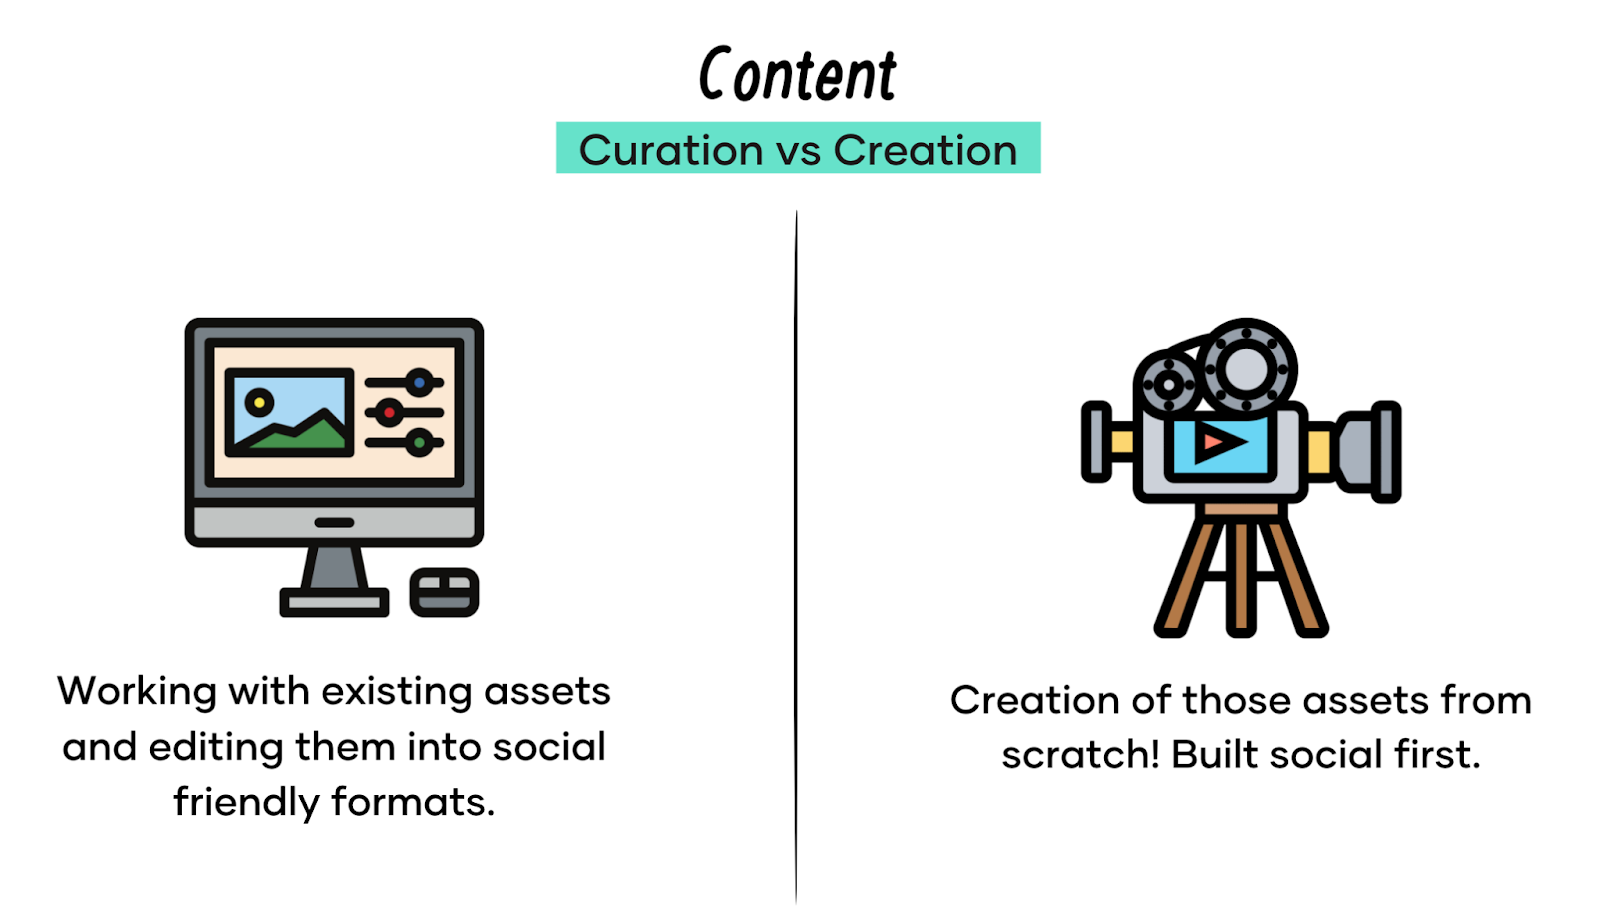 Content Creation and Curation